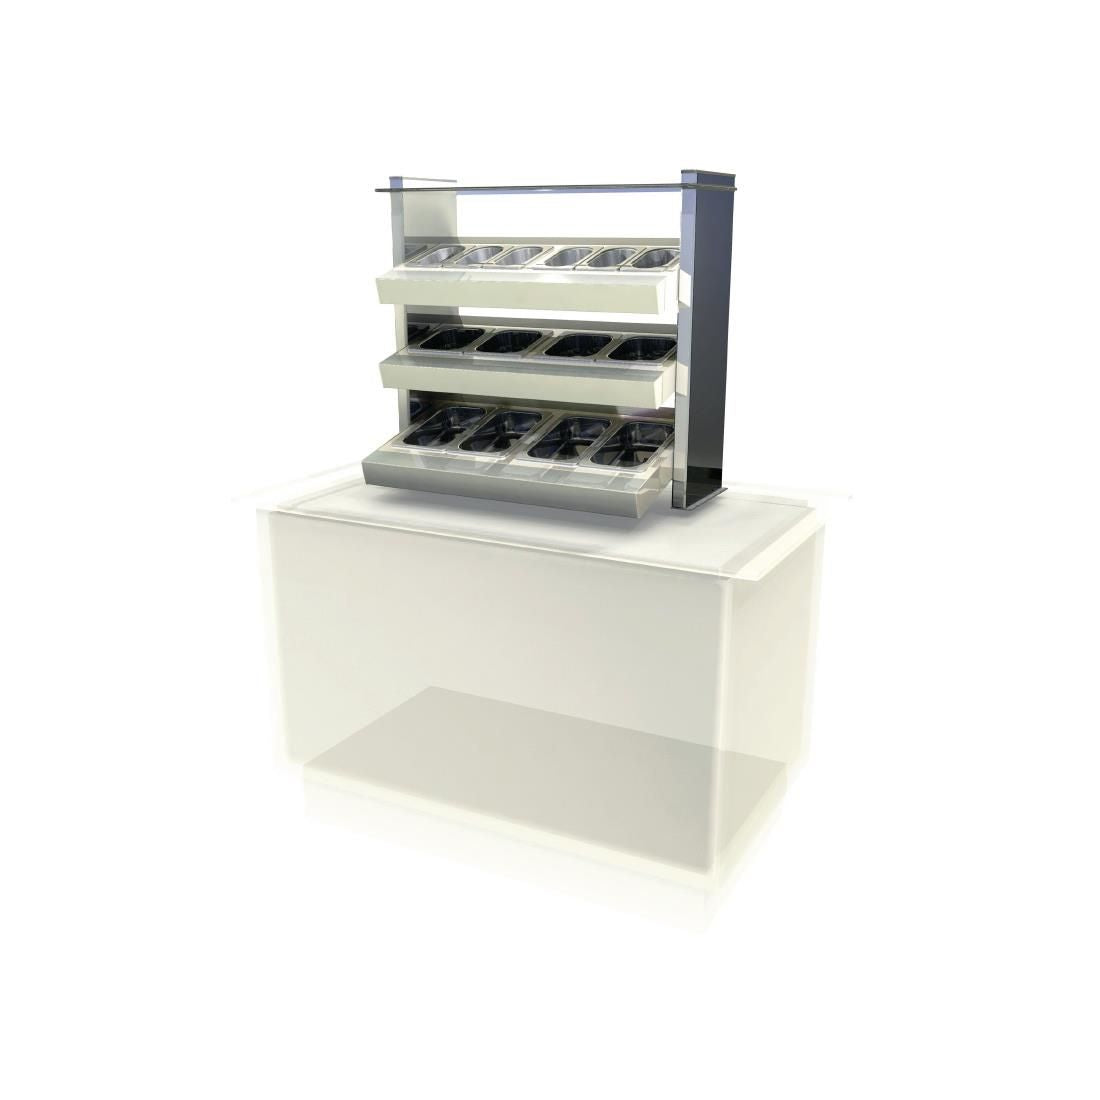 CW625 Kubus Drop In Ambient Cutlery/Condiment Unit KCCU2 JD Catering Equipment Solutions Ltd